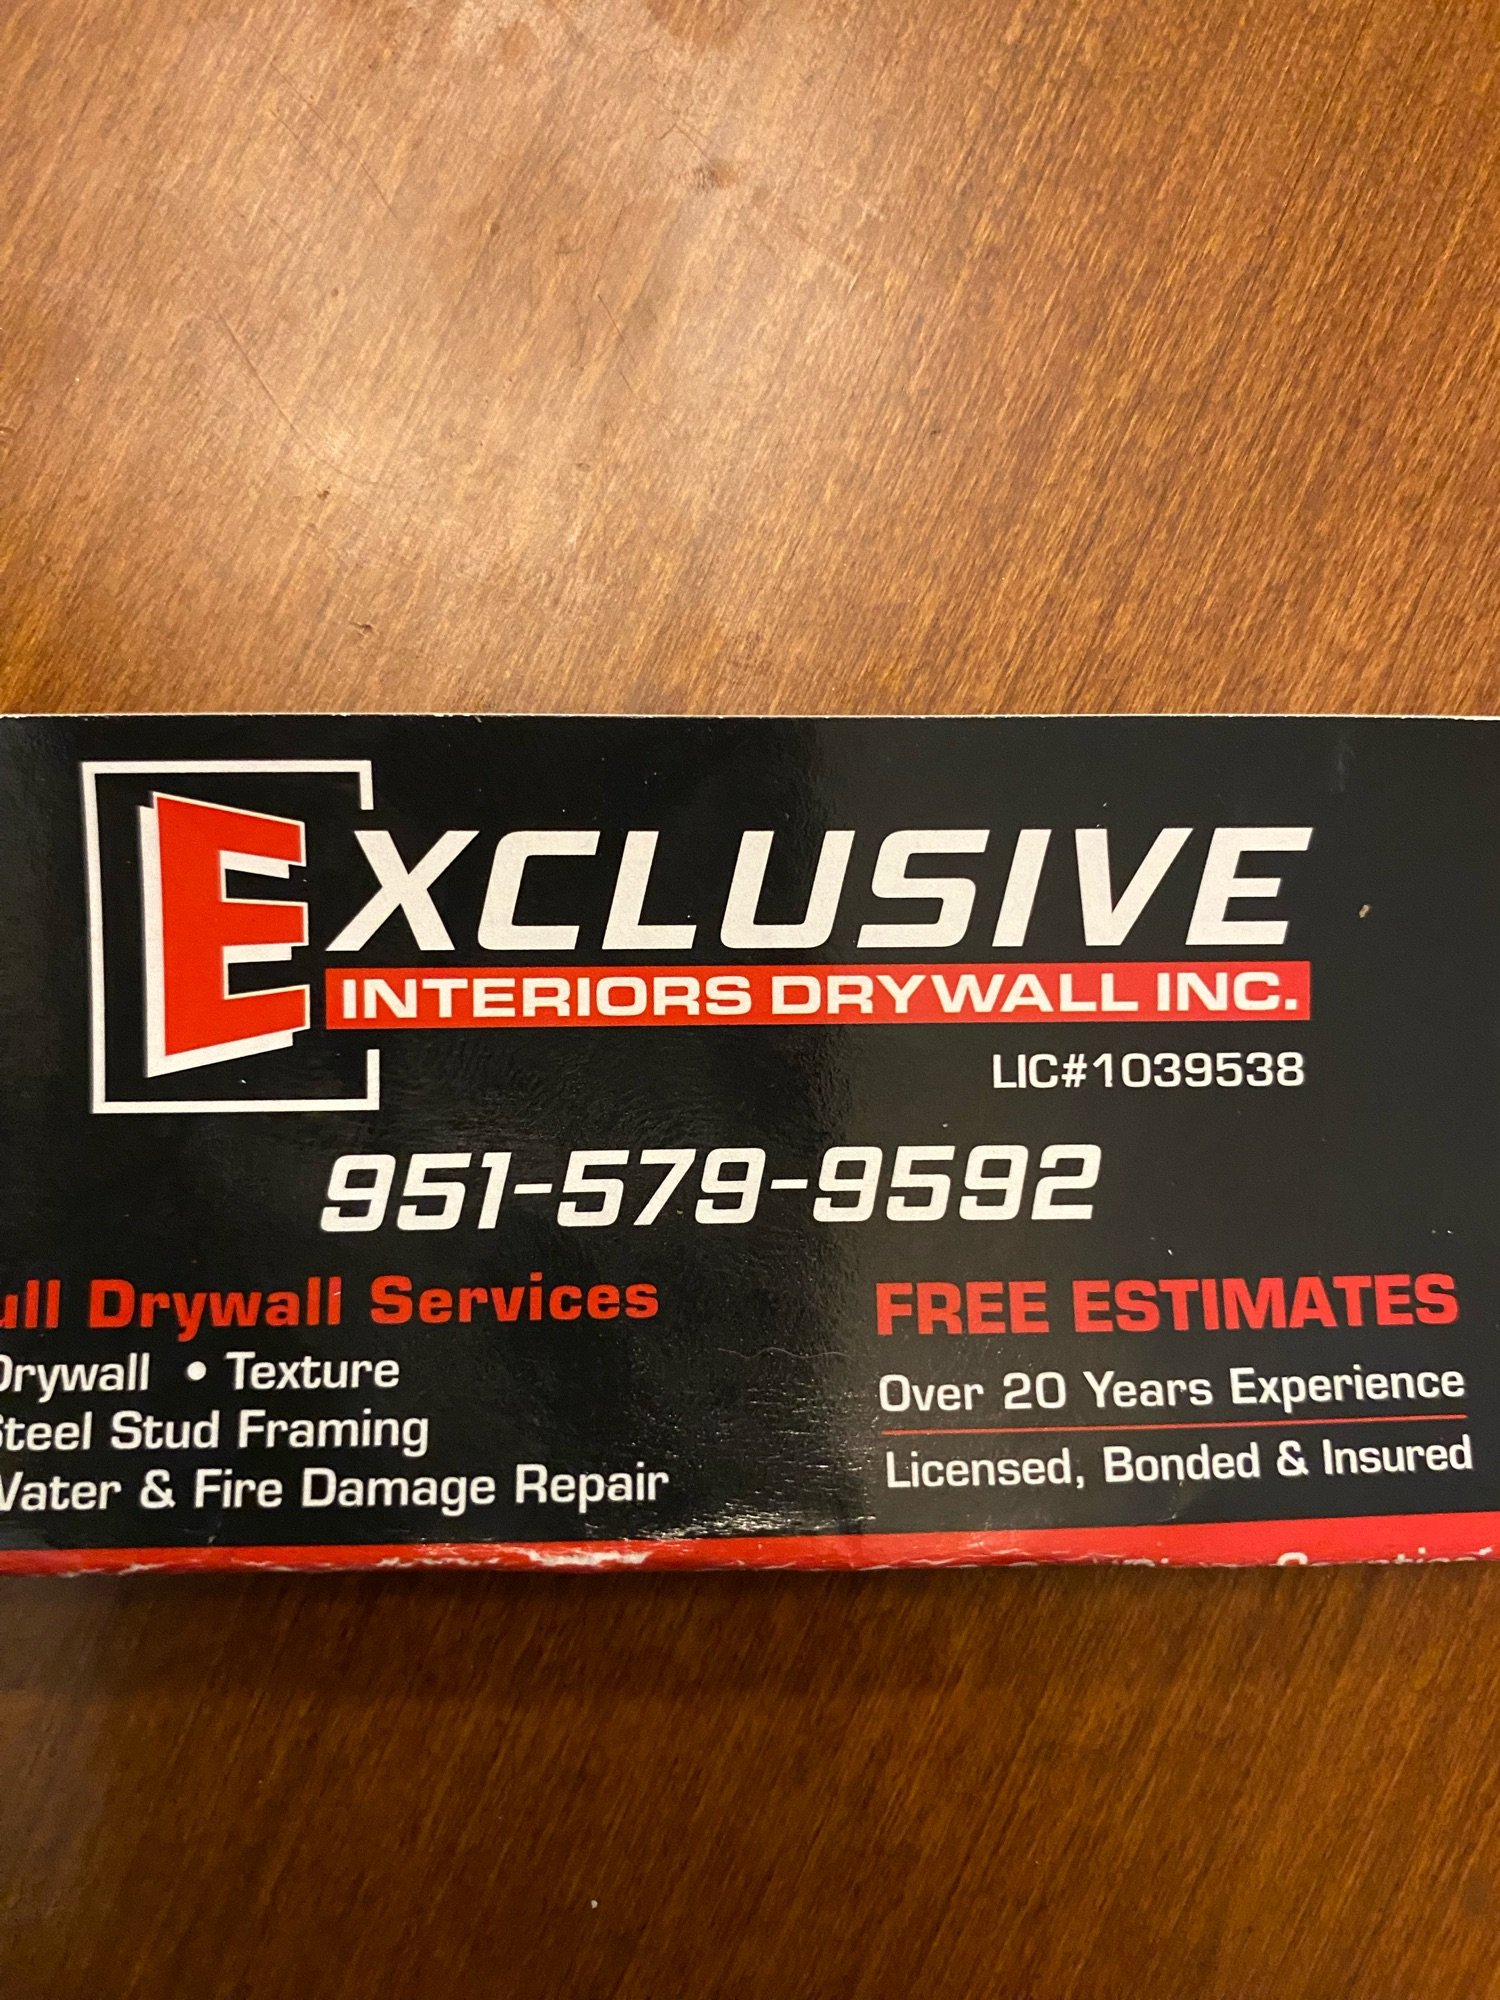 Exclusive Interiors Drywall Logo